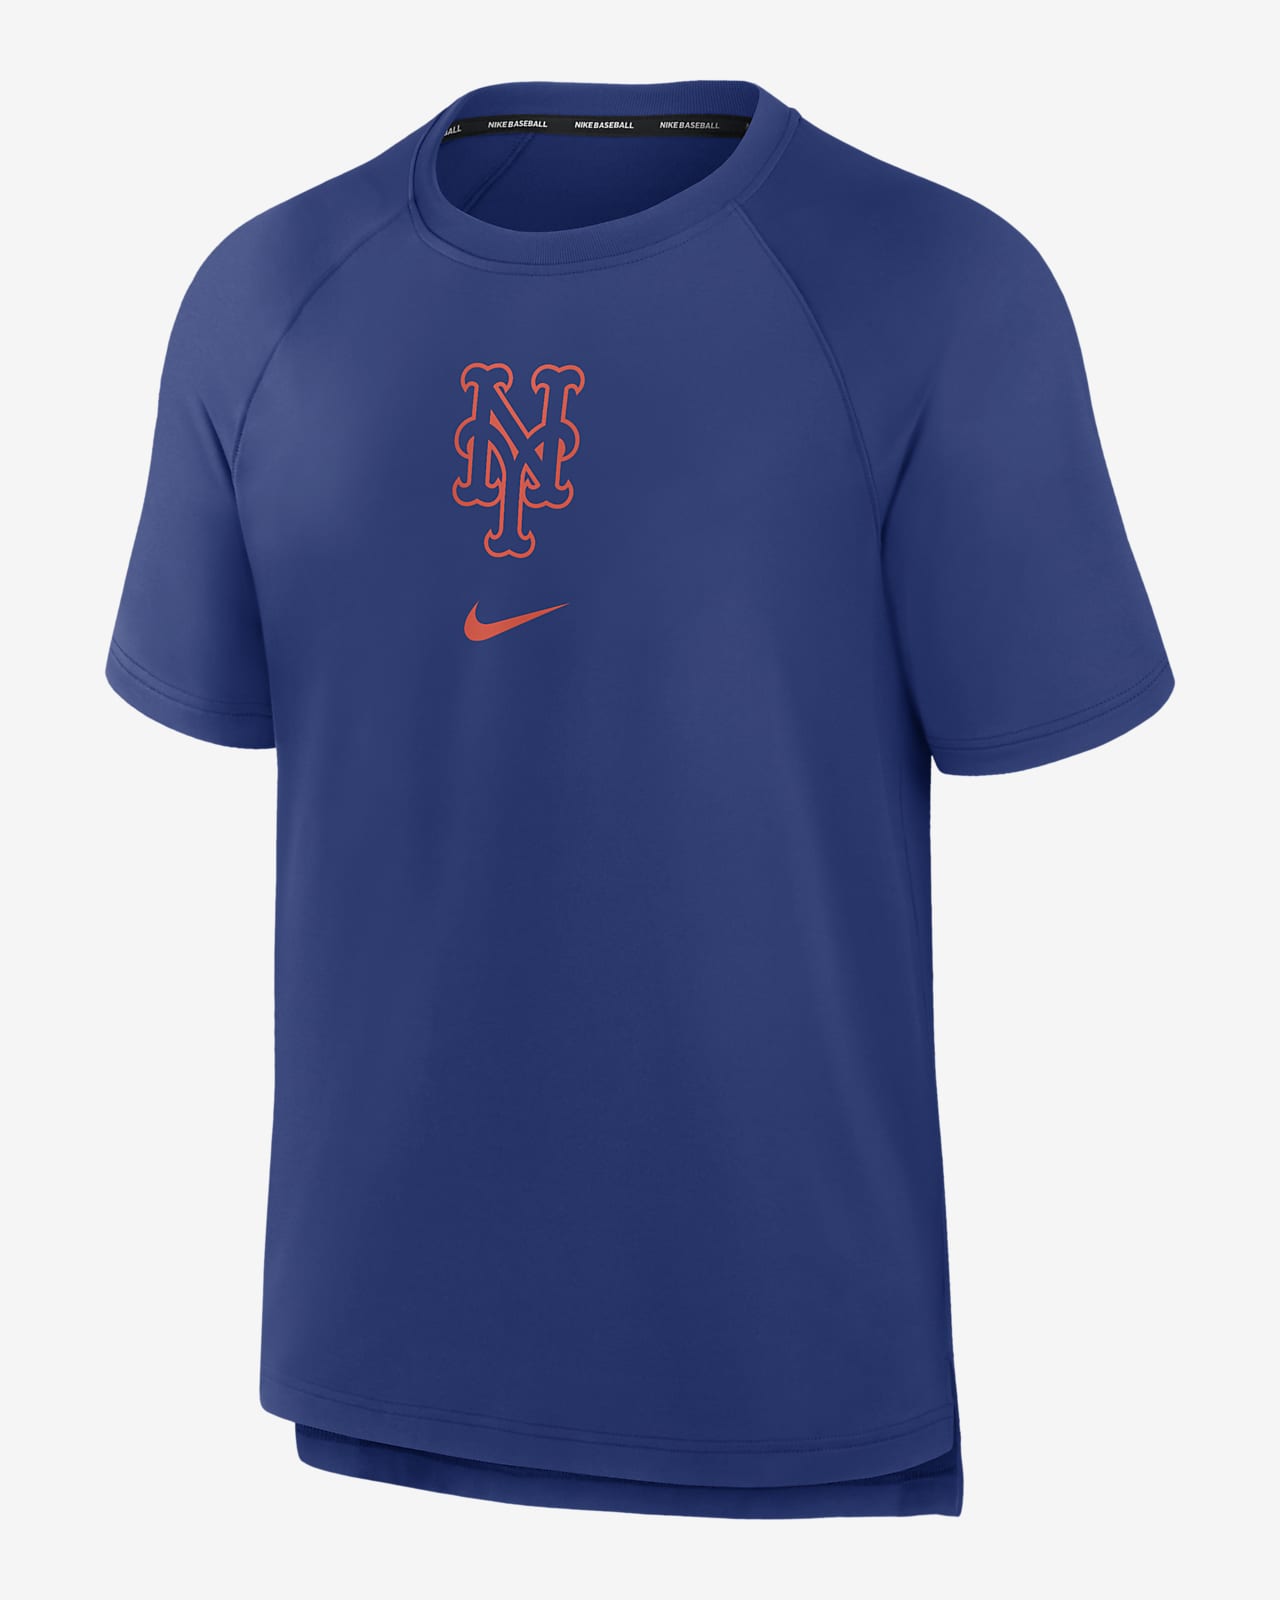 New York Mets Authentic Collection Pregame Men's Nike Dri-FIT MLB T-Shirt